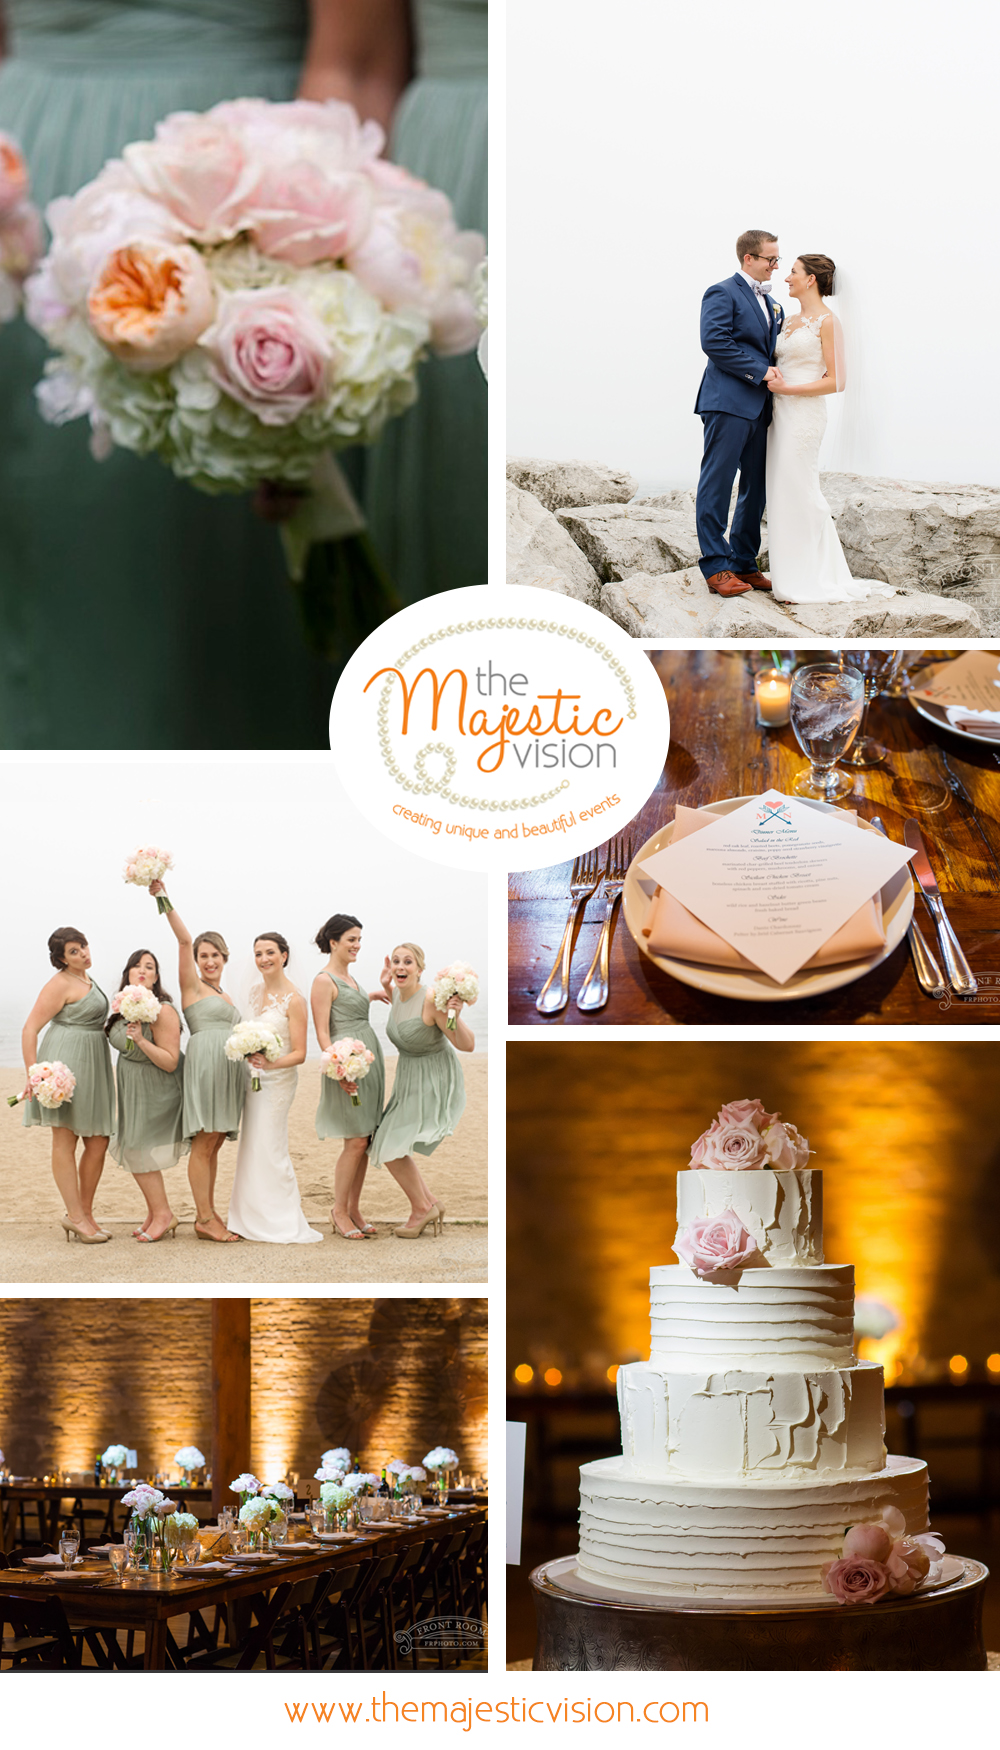 Milwaukee wedding planner The Majestic Vision planned this beautiful wedding at St John